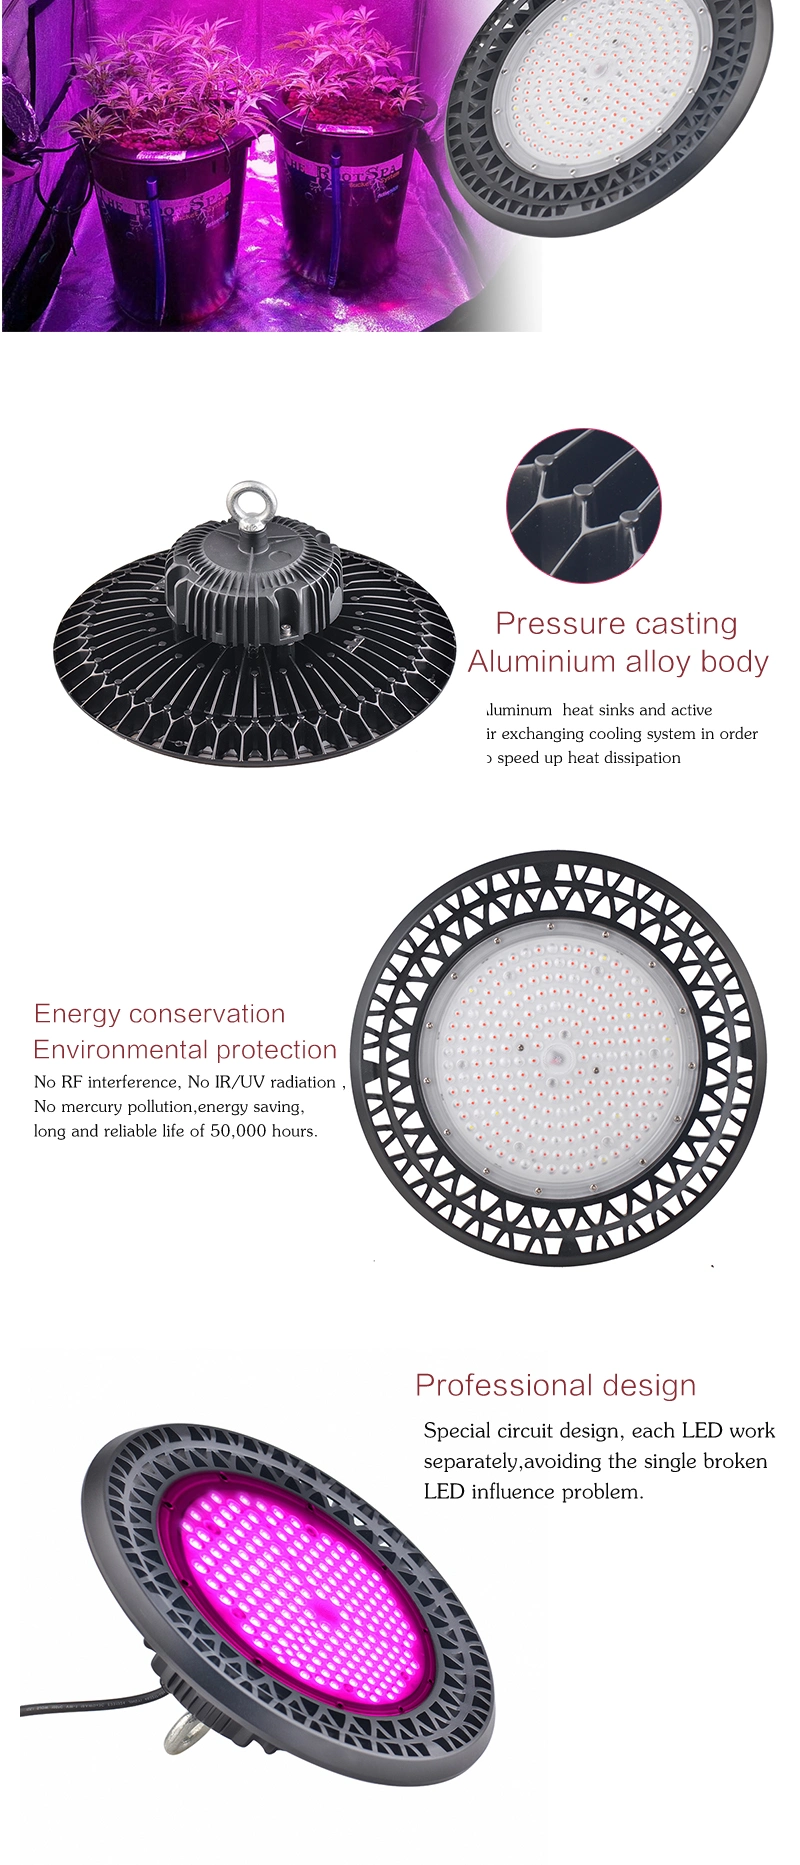 Aluminum Die-Casting SMD3030 and UL Driver 100W 200W UFO LED Grow Lights